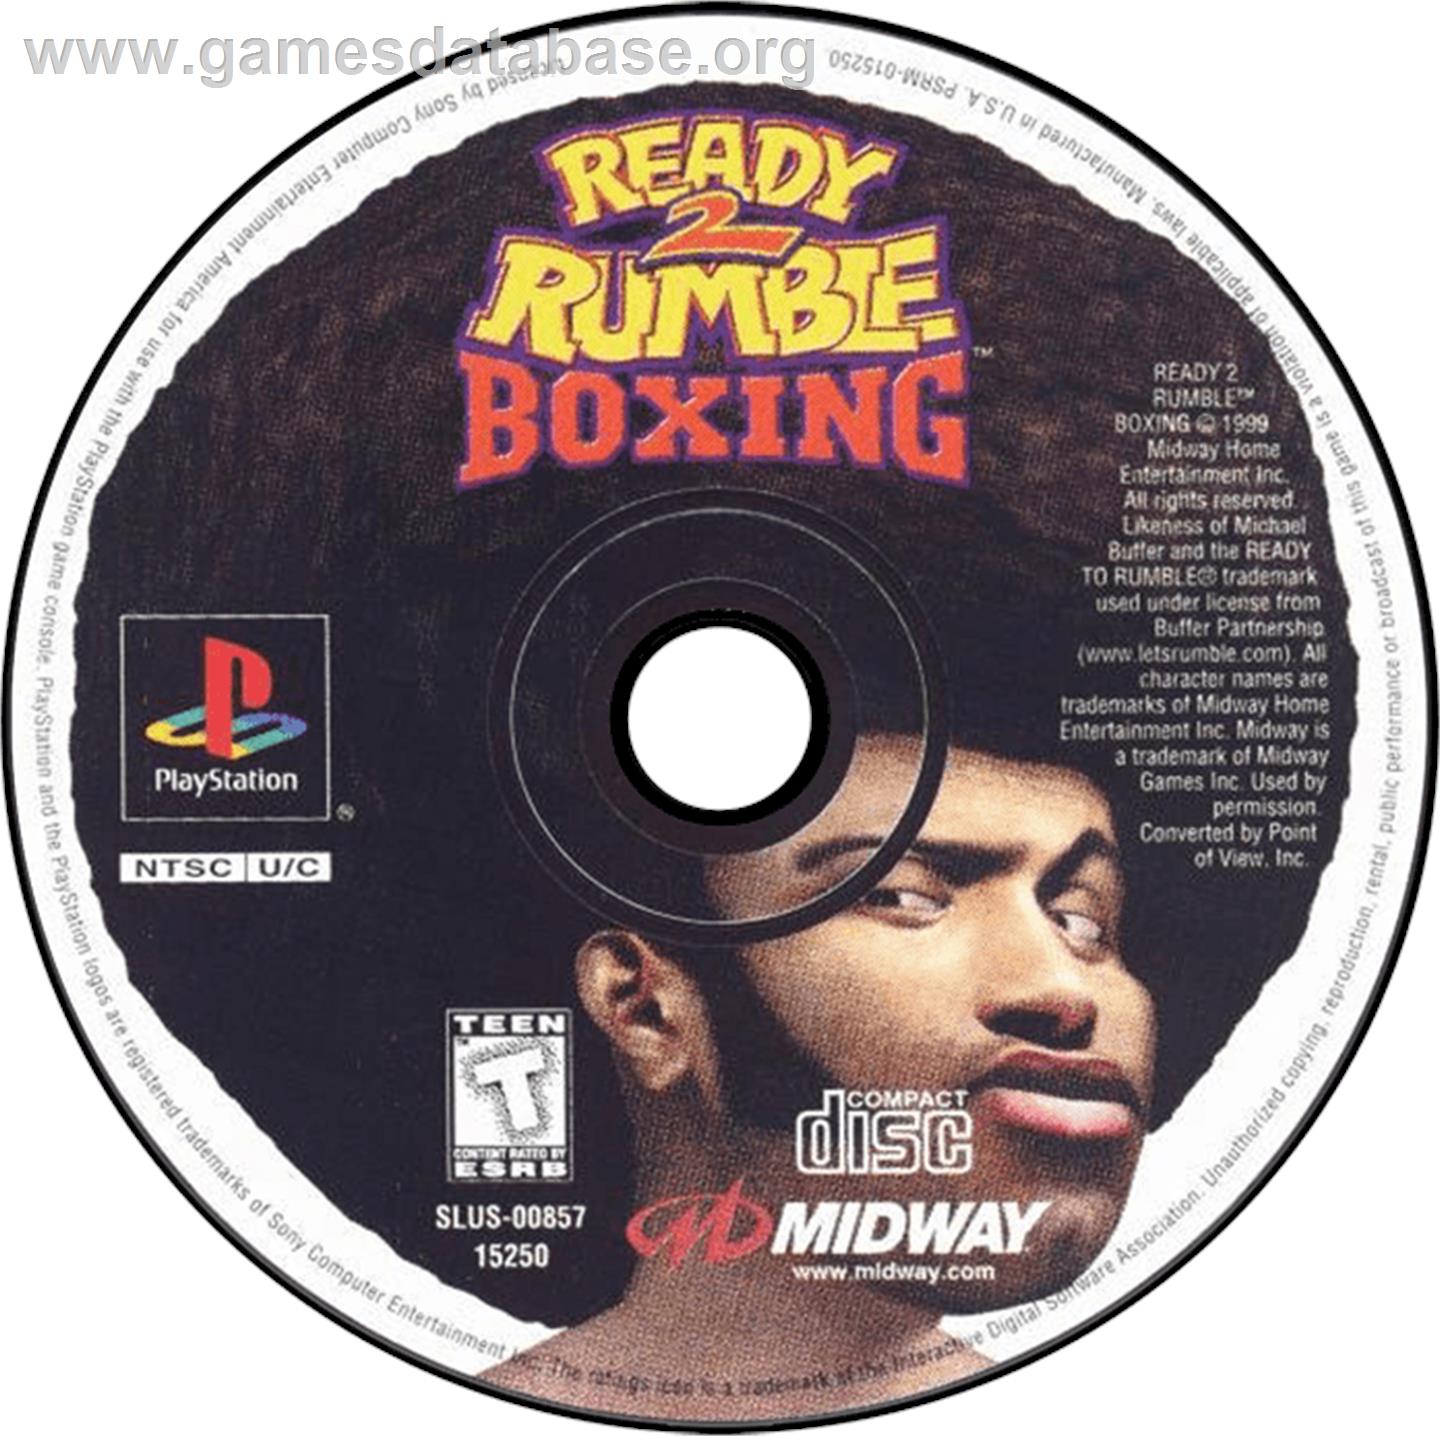 Ready 2 Rumble Boxing - Sony Playstation - Artwork - Disc